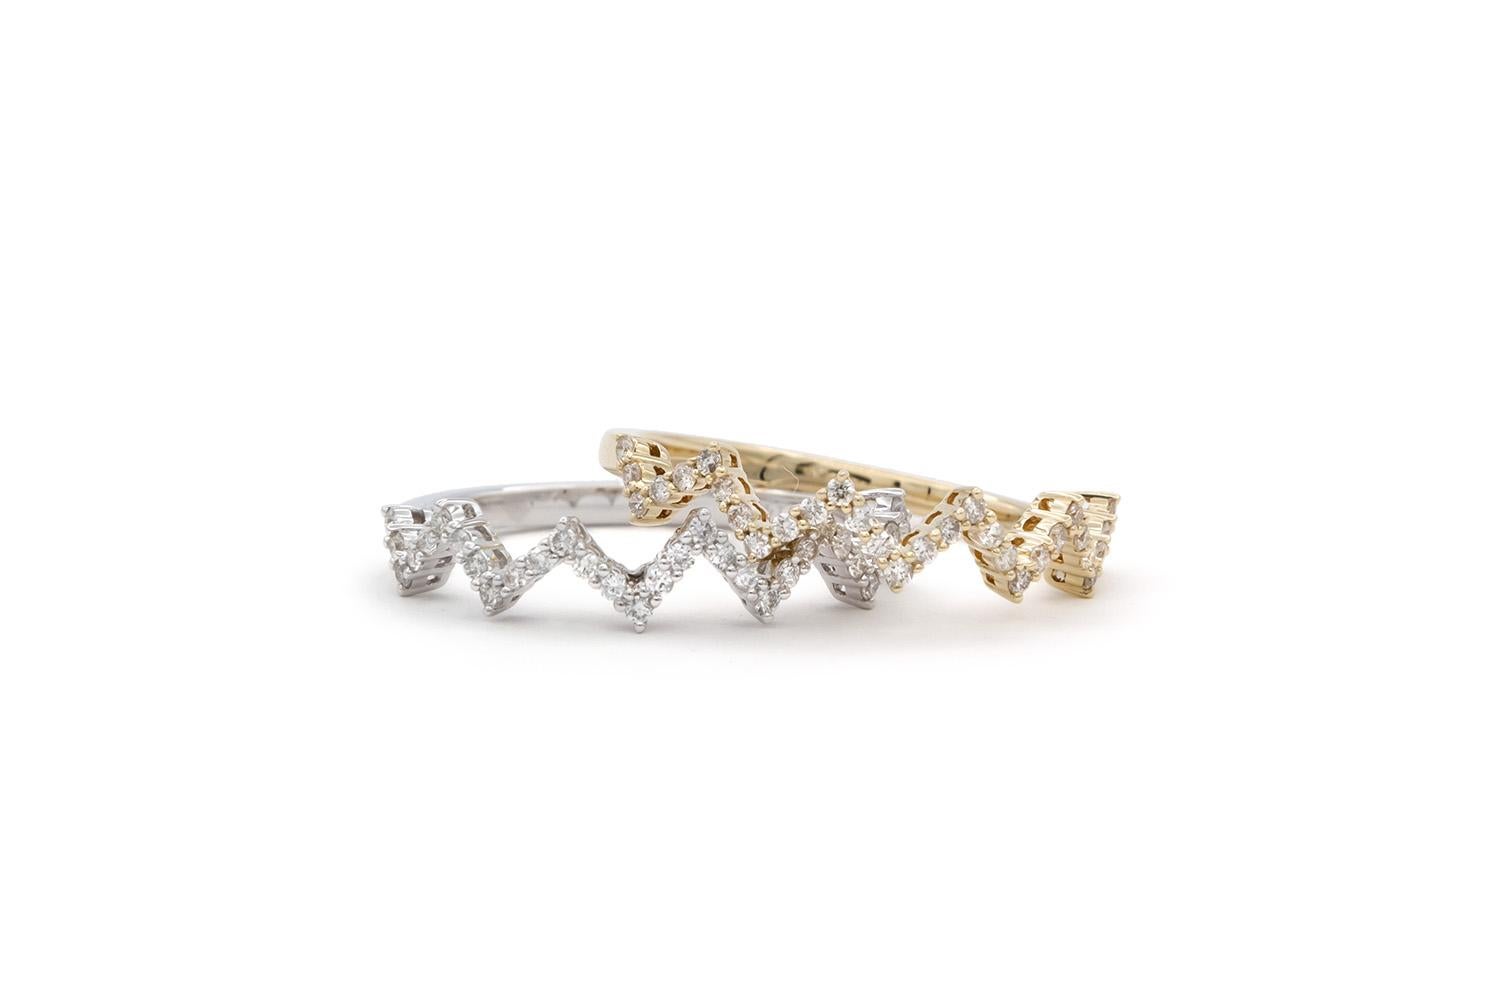 We are pleased to offer these Brand New 14k Yellow & White Gold Diamond Zig Zag Stacking Fashion Rings. They feature 0.38ctw G/VS Round brilliant Cut Diamonds set in 14k gold. They are size 6.5 US and measures 1.15mm wide above the finger and 1.75mm